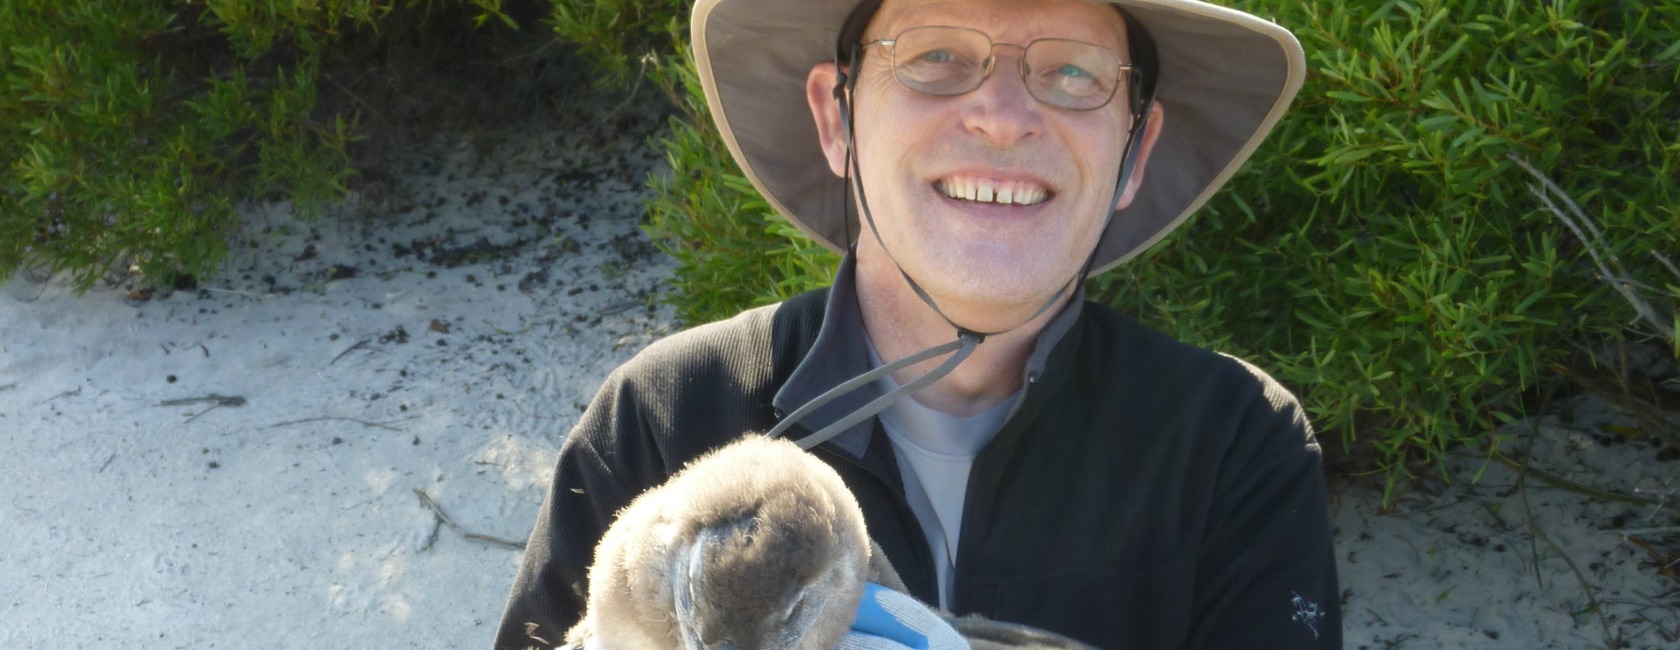 Professor Charles Bergman holds a penguin on South Africa's Robben Island, where he spent two weeks researching penguins for a Smithsonian article. (Photo courtesy of Charles Bergman)